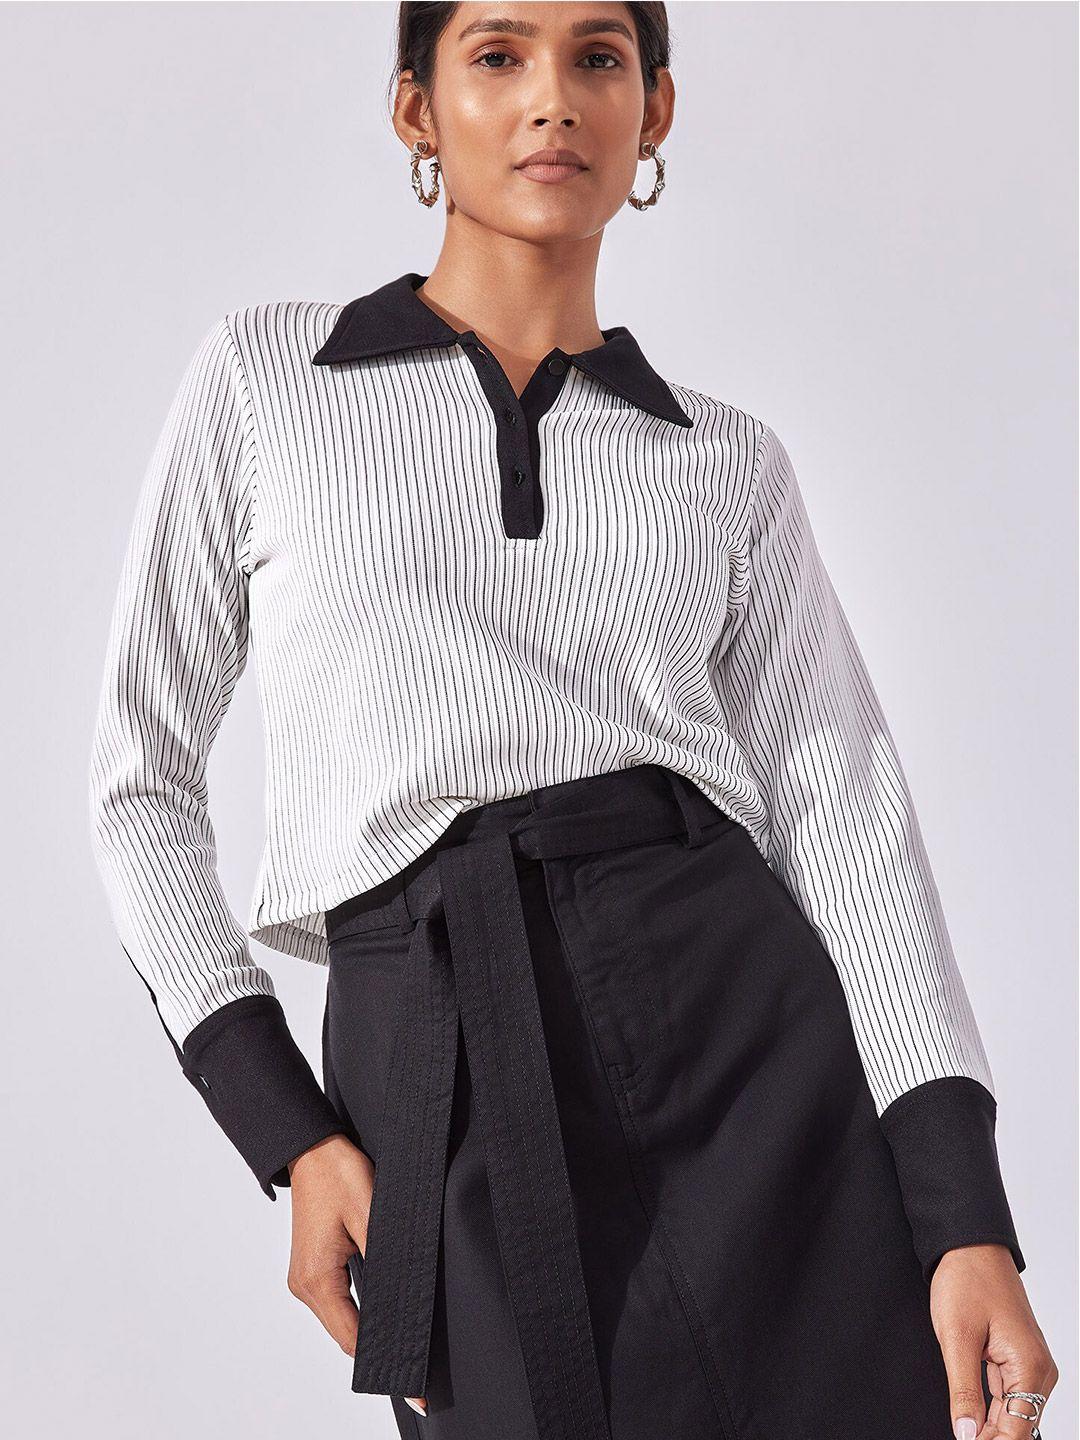 the label life white & black striped shirt style top